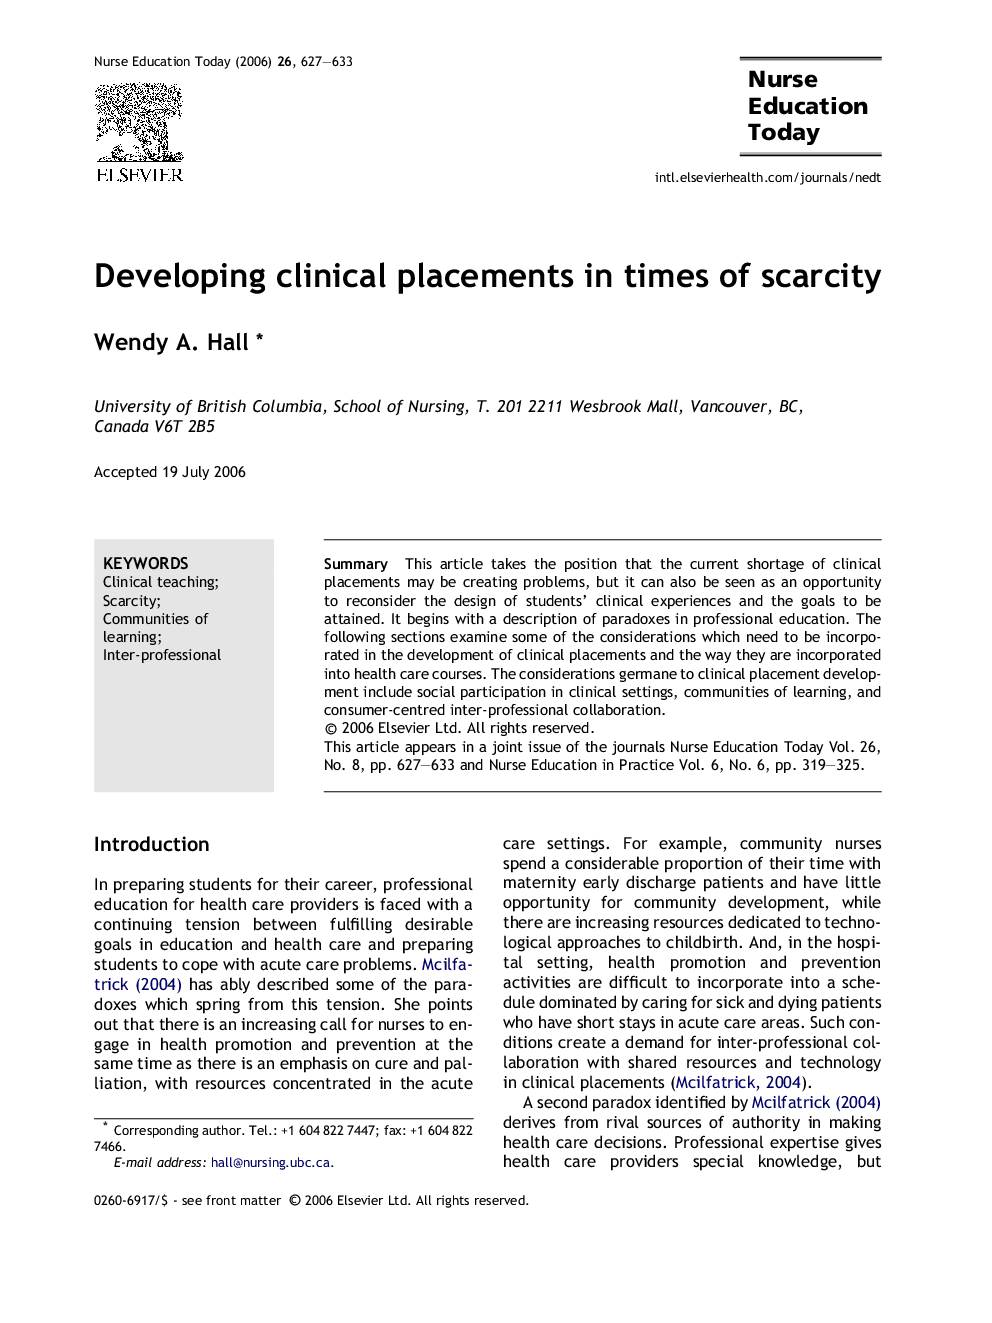 Developing clinical placements in times of scarcity